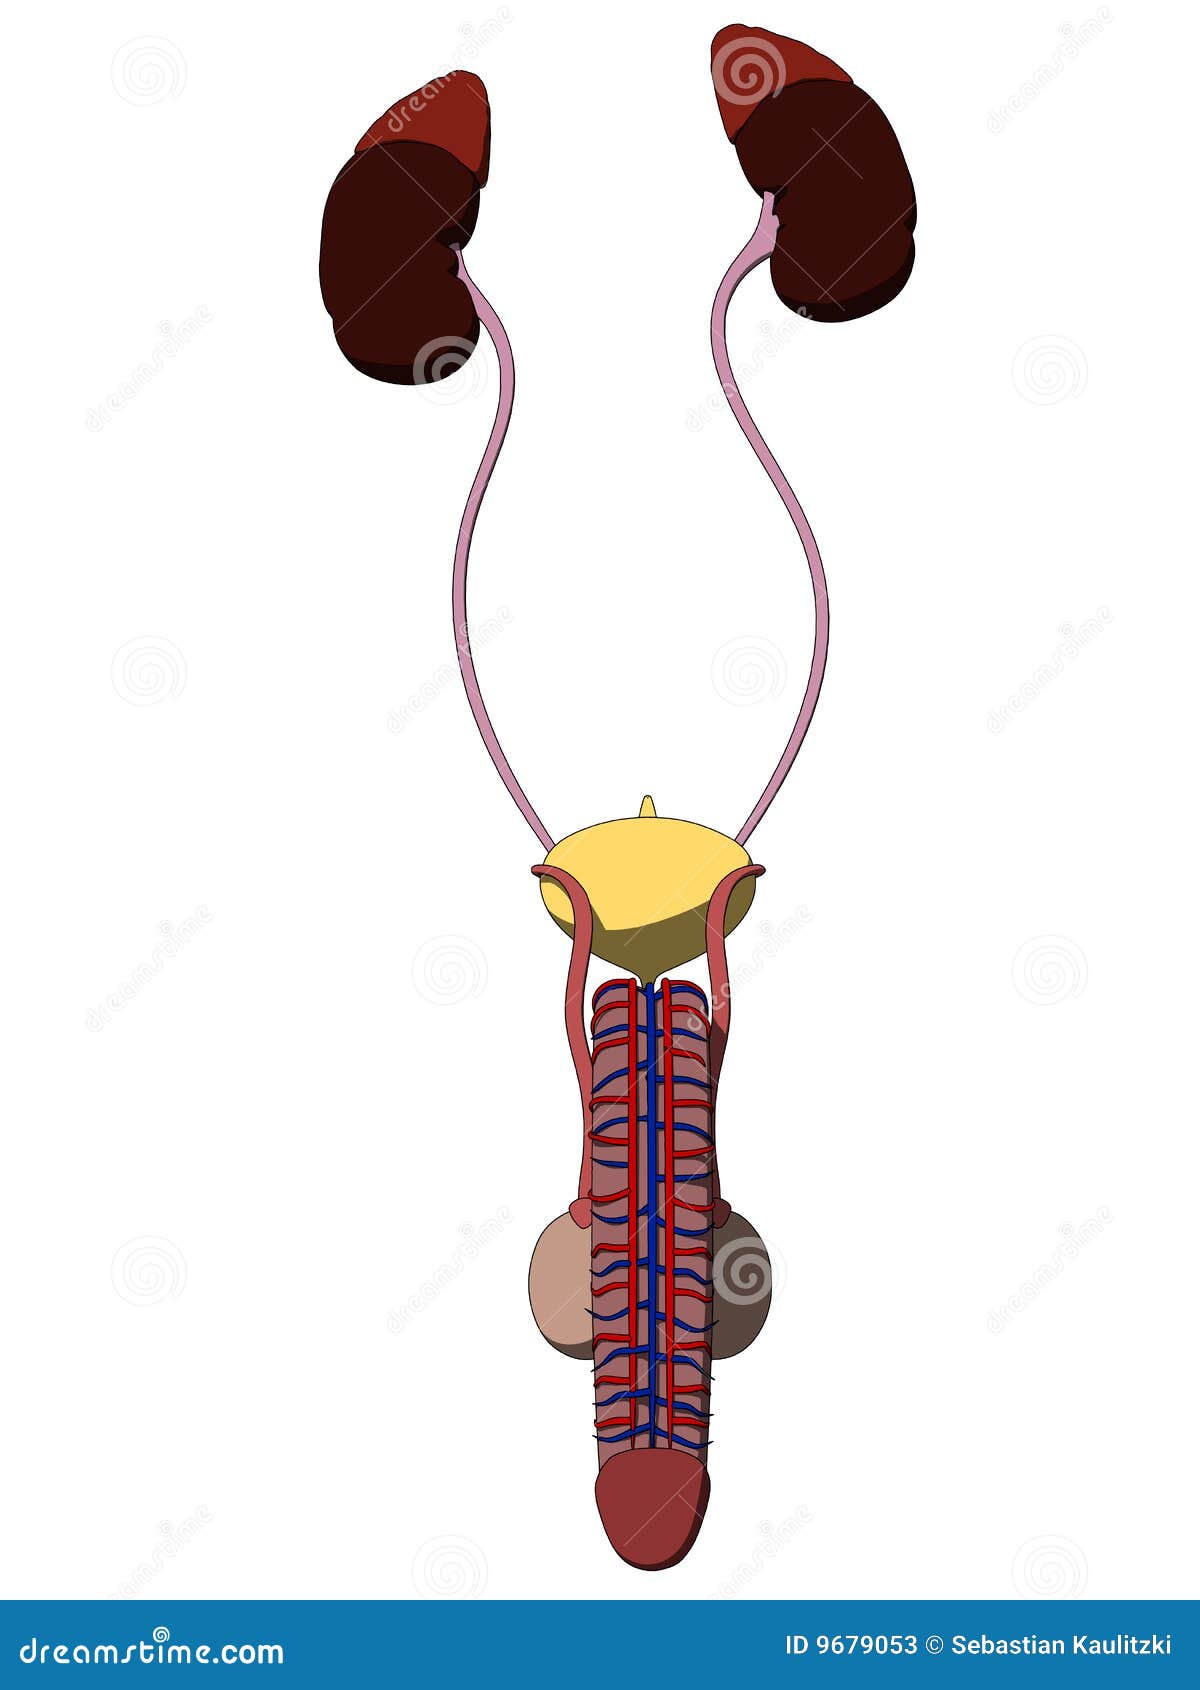 Male Urinary System Stock Vector Illustration Of Kidney 9679053